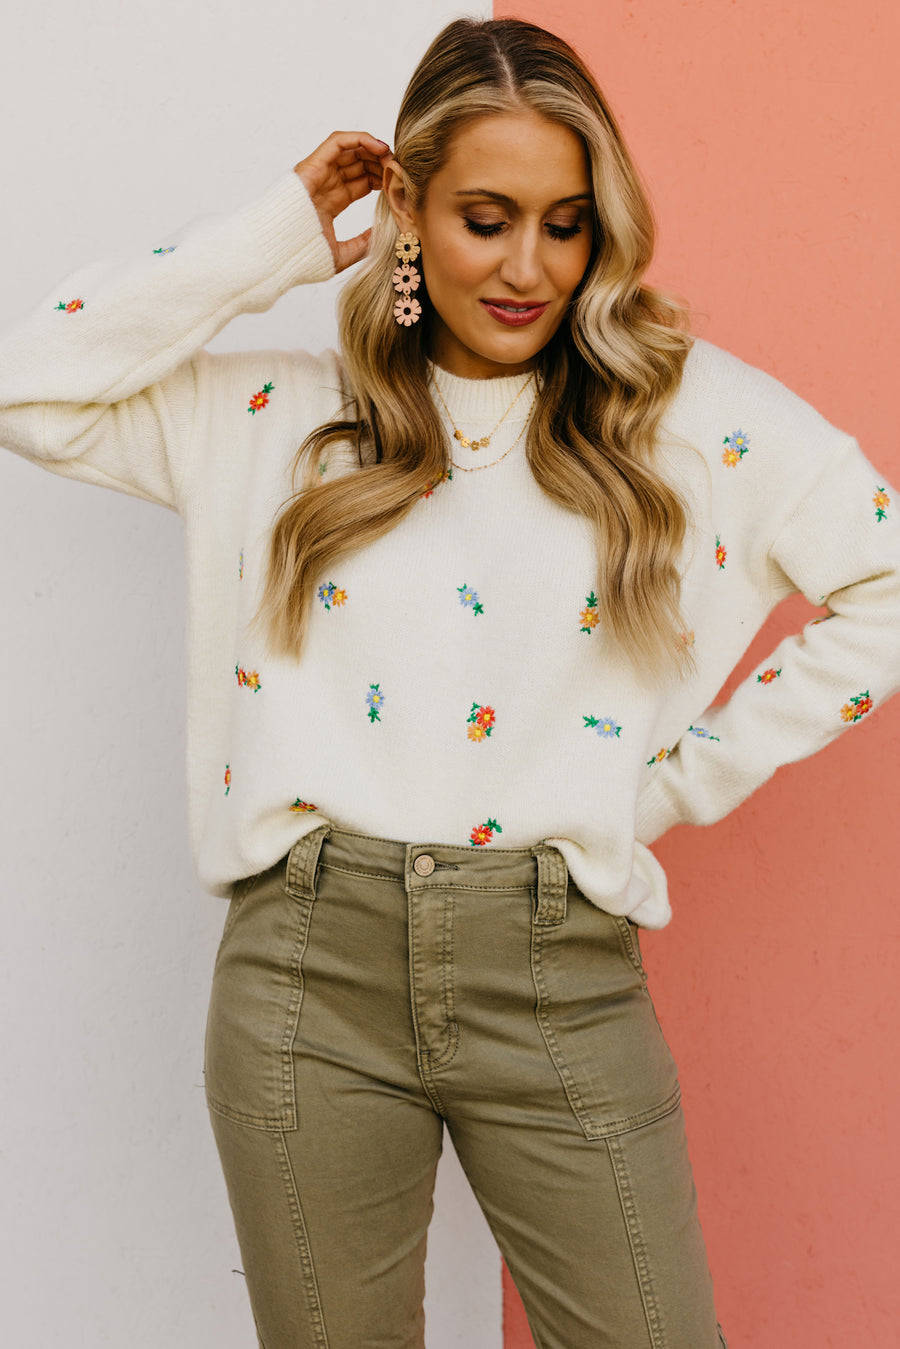 The Rocco Embroidered Floral Sweater